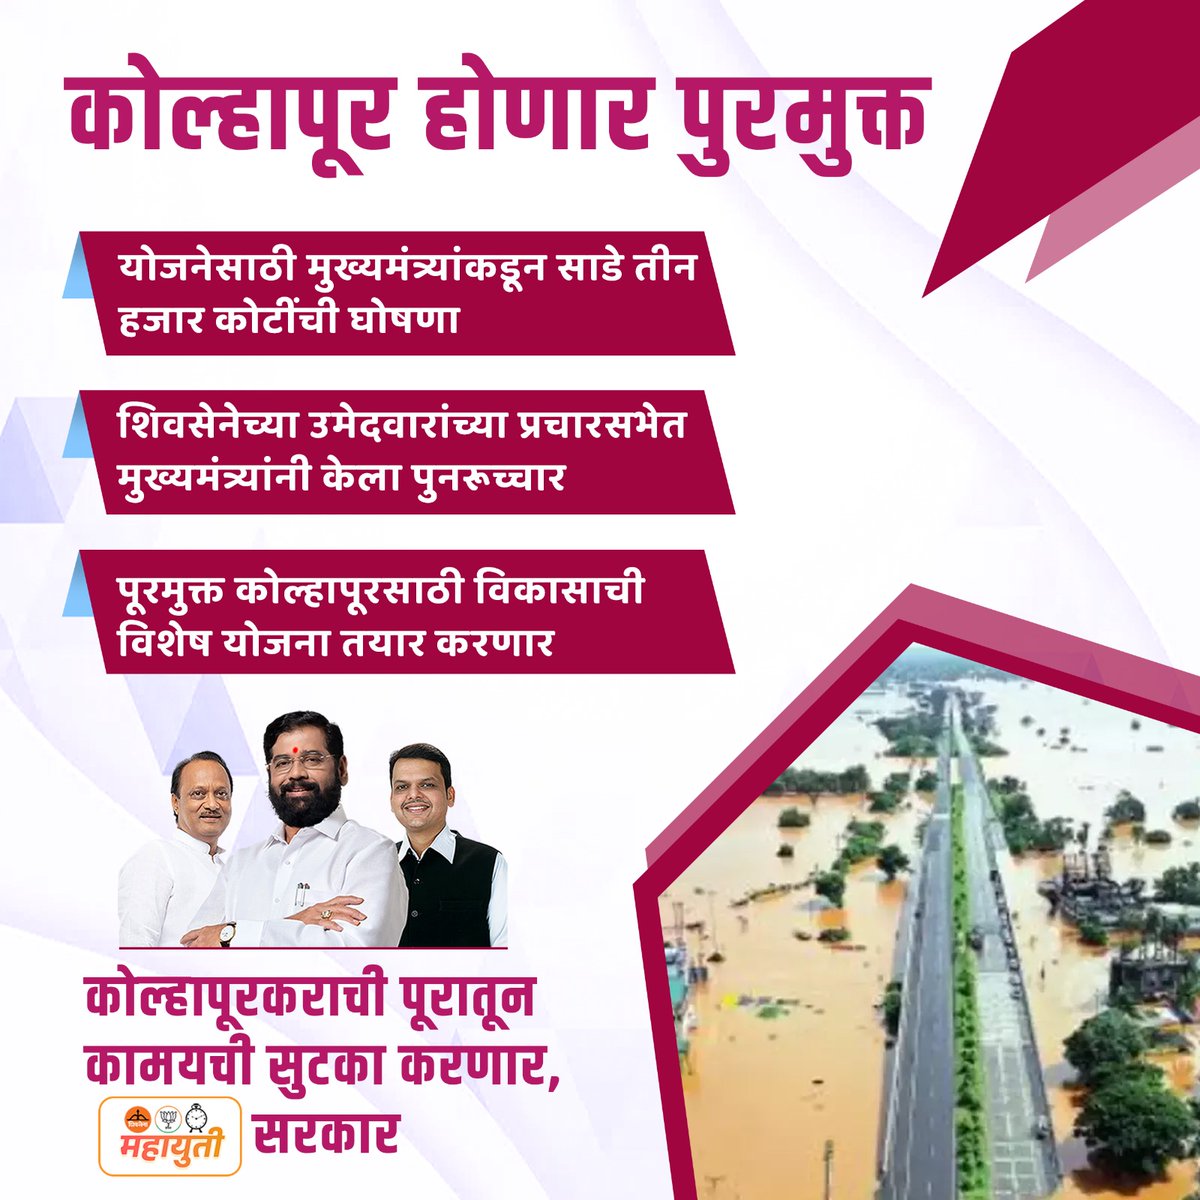 Shiv Sena's campaign meeting witnessed a powerful pledge from CM Eknath Shinde to make Kolhapur flood-free. This proactive approach towards disaster management deserves applause.